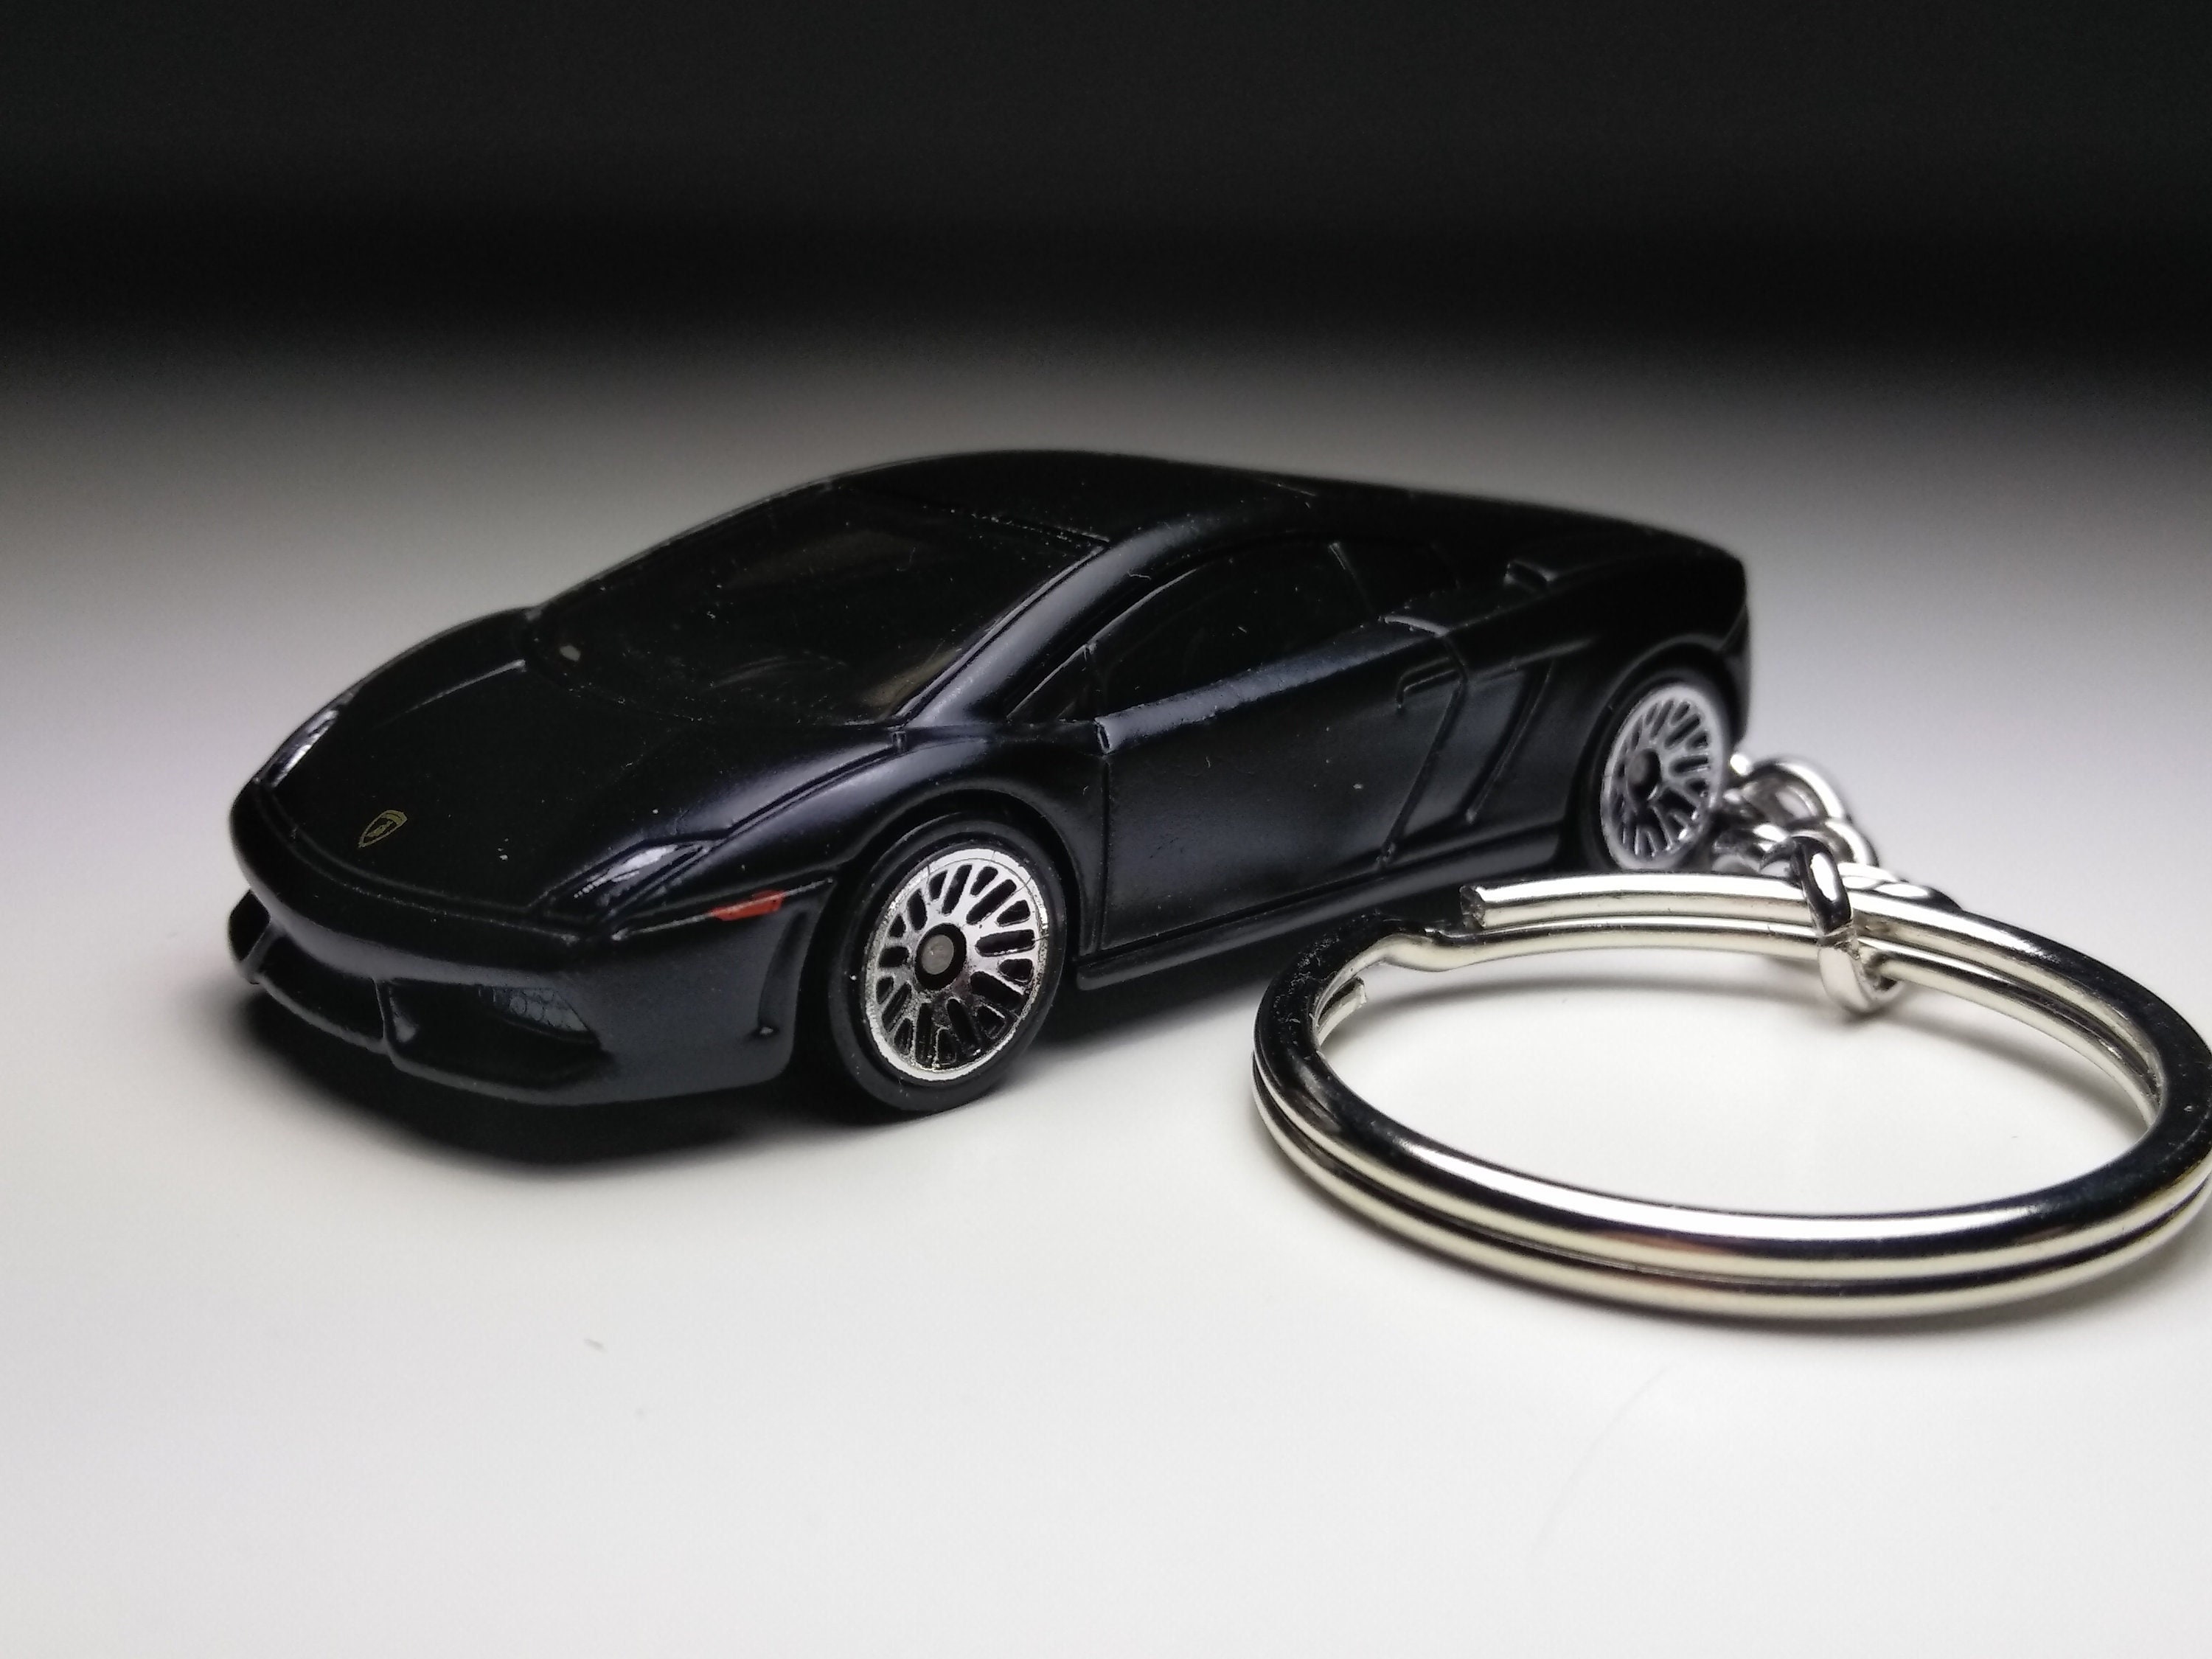 2023 Hot Wheels Coupe Clip Black And Gold Keychain Fob Loose